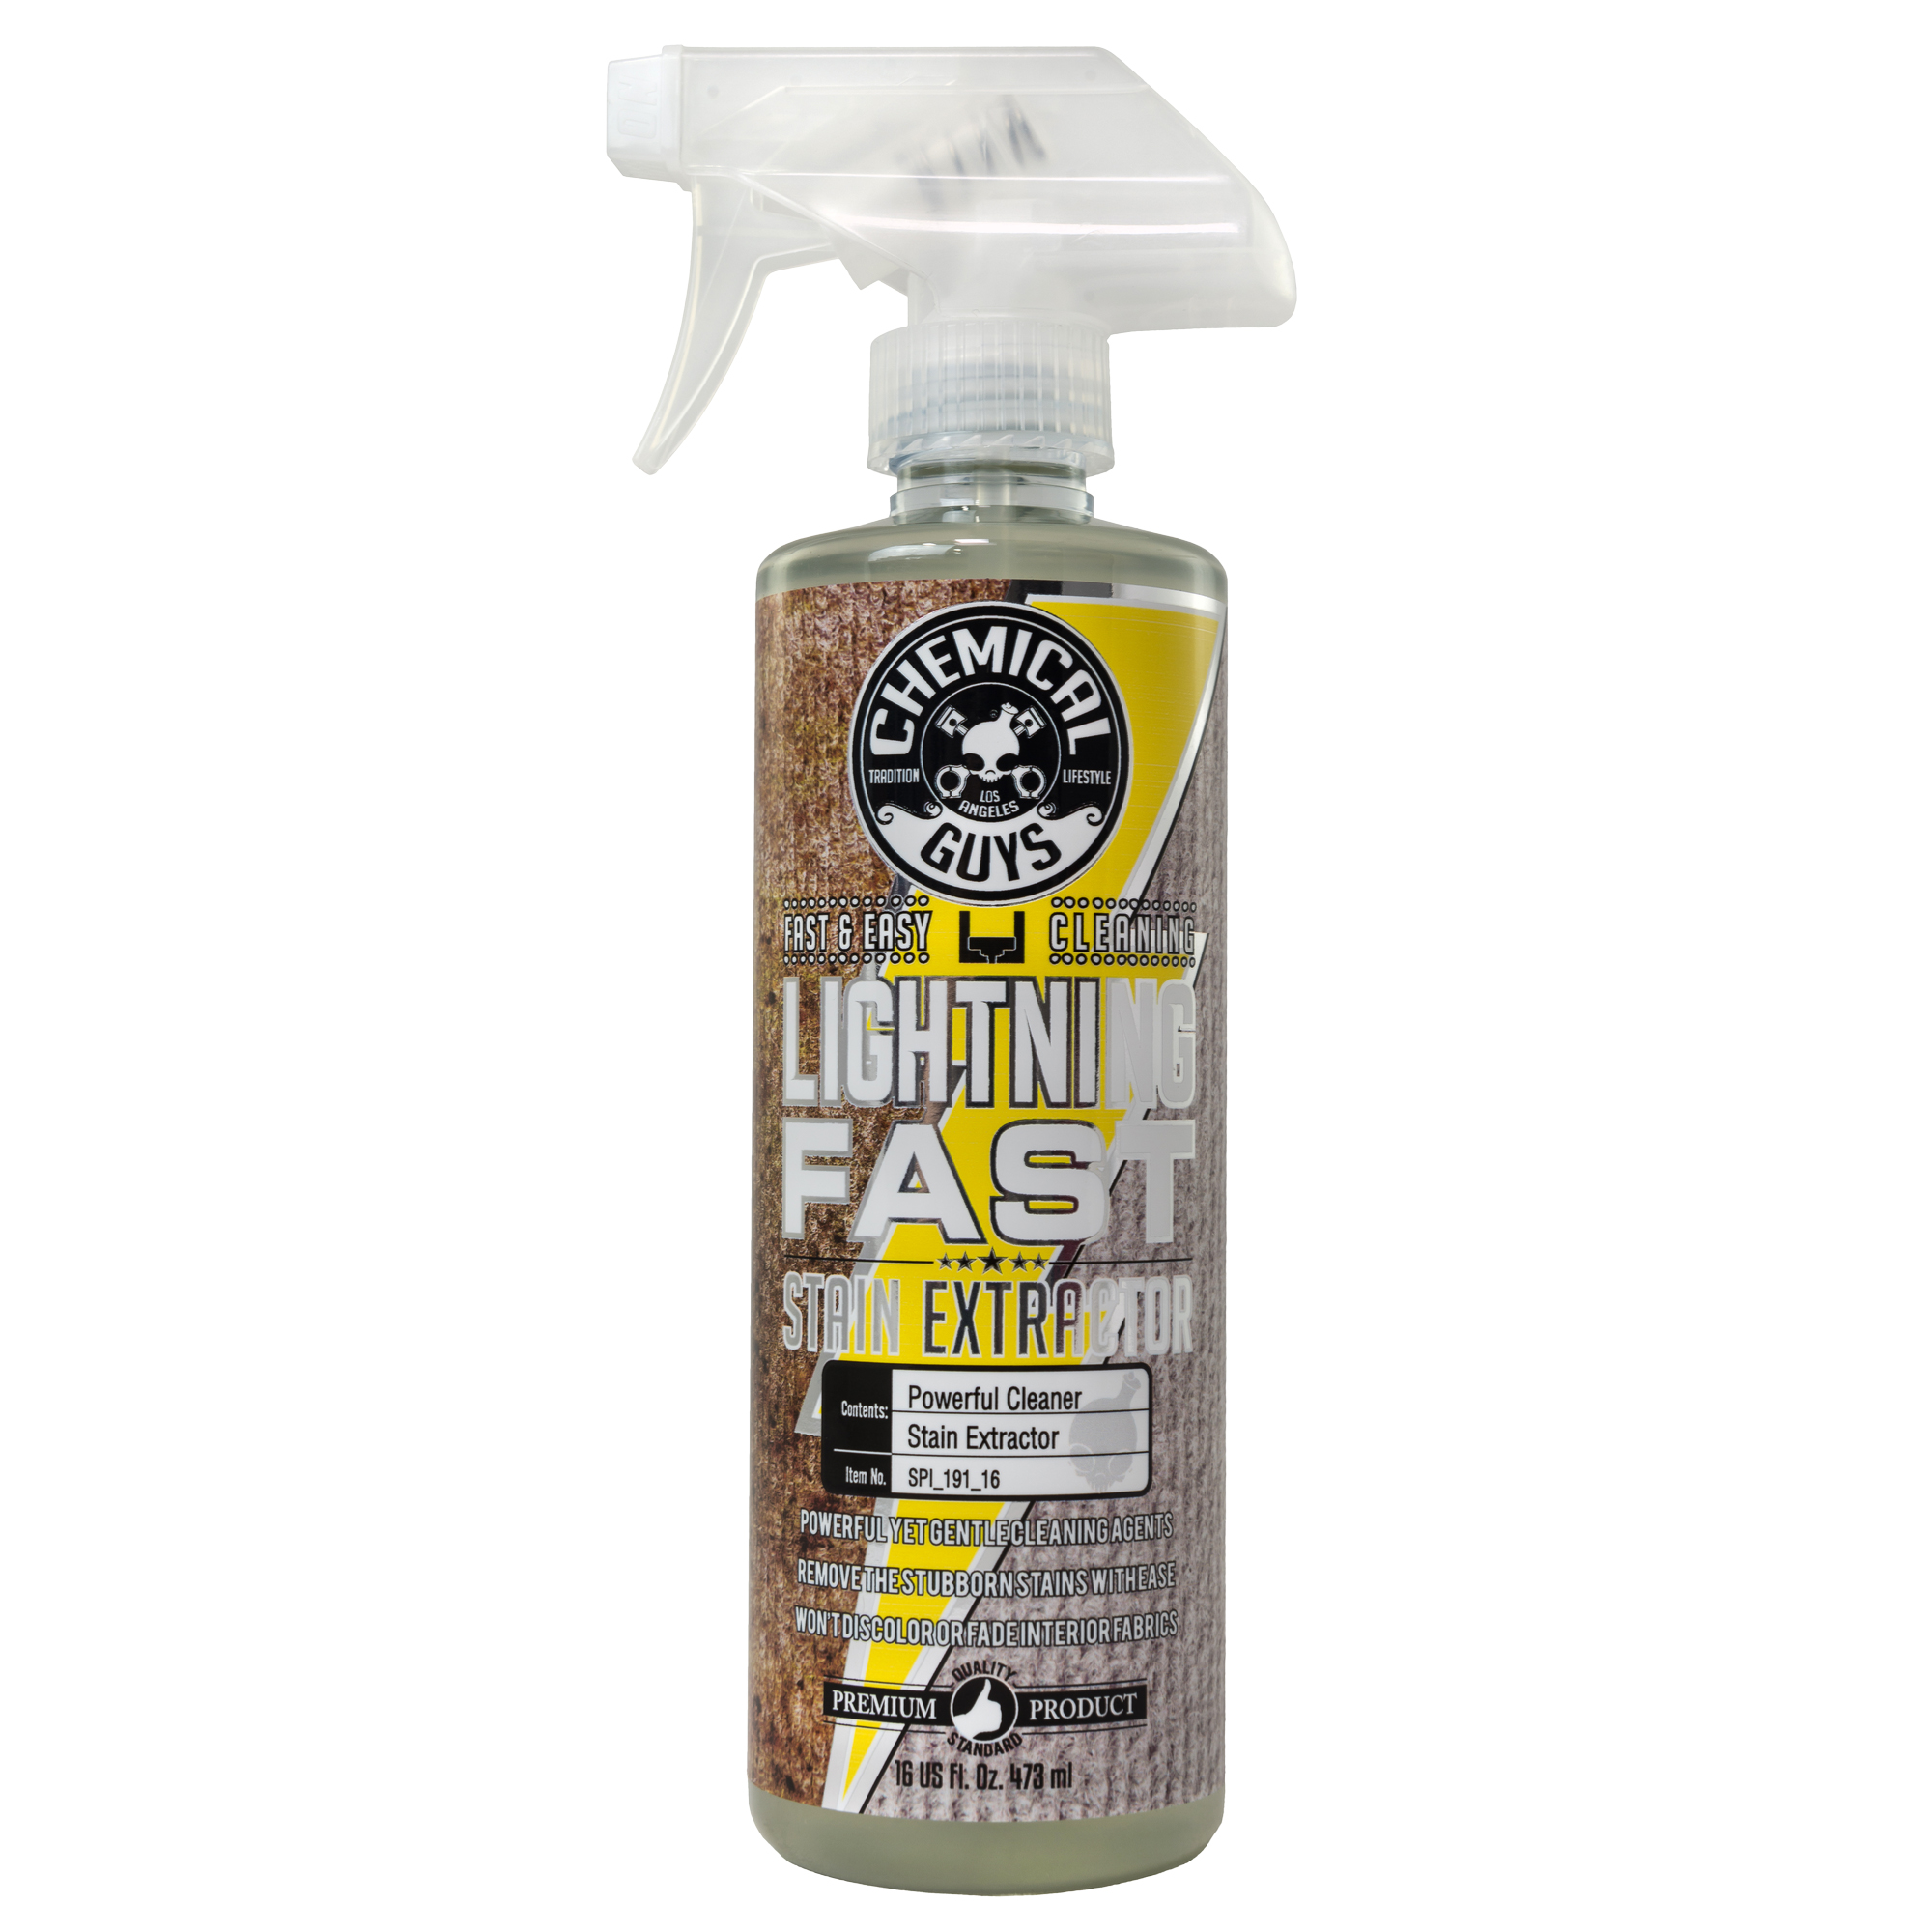 Chemical Guys SPI_191 Lightning Fast Carpet and Upholstery Stain Extractor, 16 oz - image 1 of 11